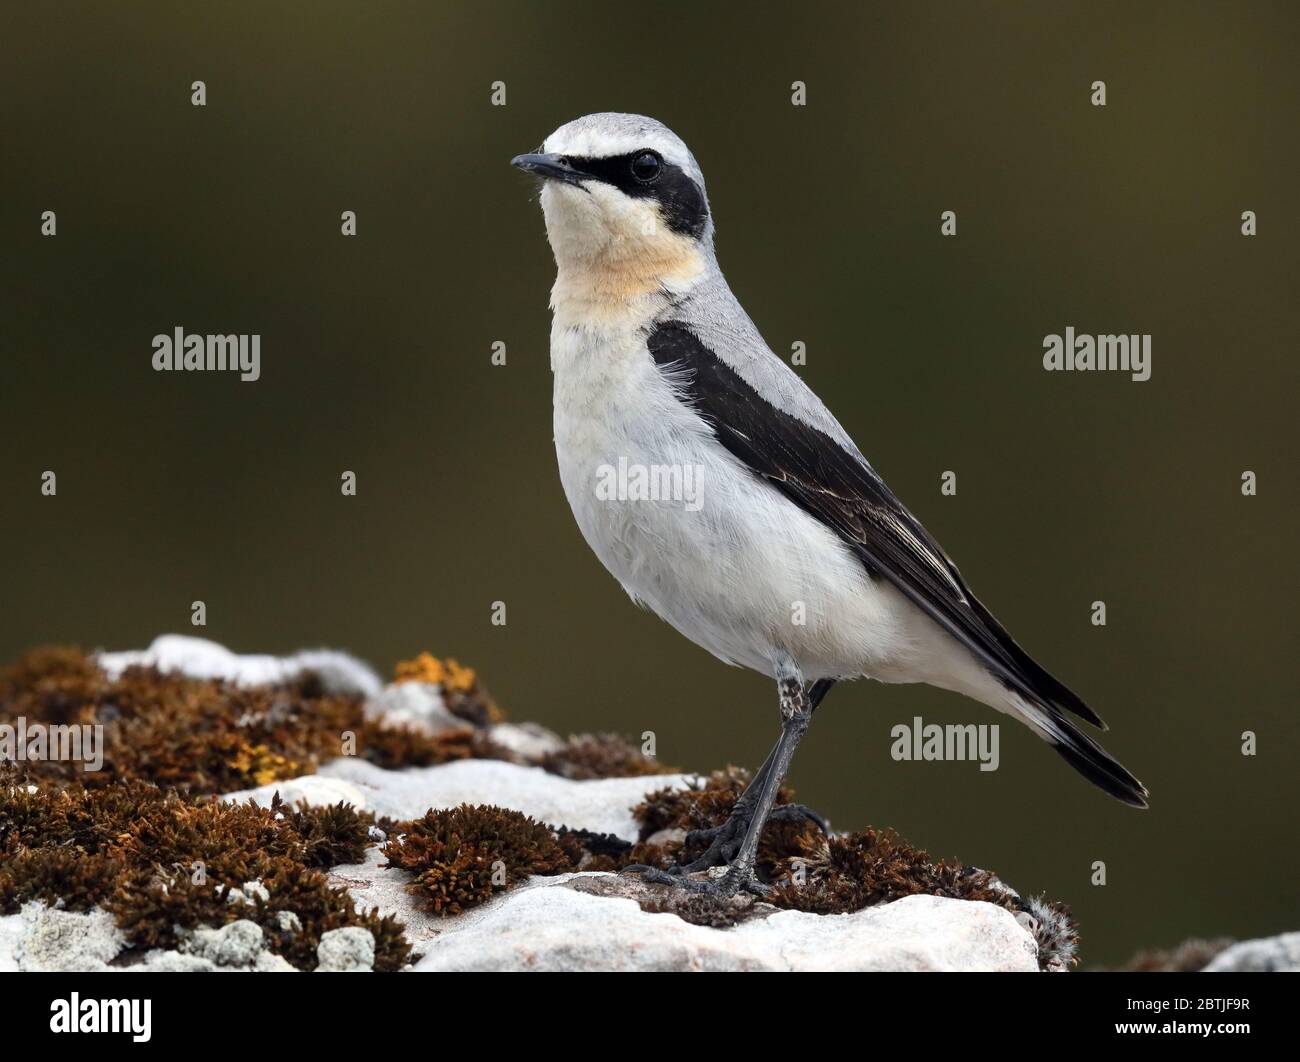 Northern wheatear, Oenanthe oenanthe standing on stone Stock Photo